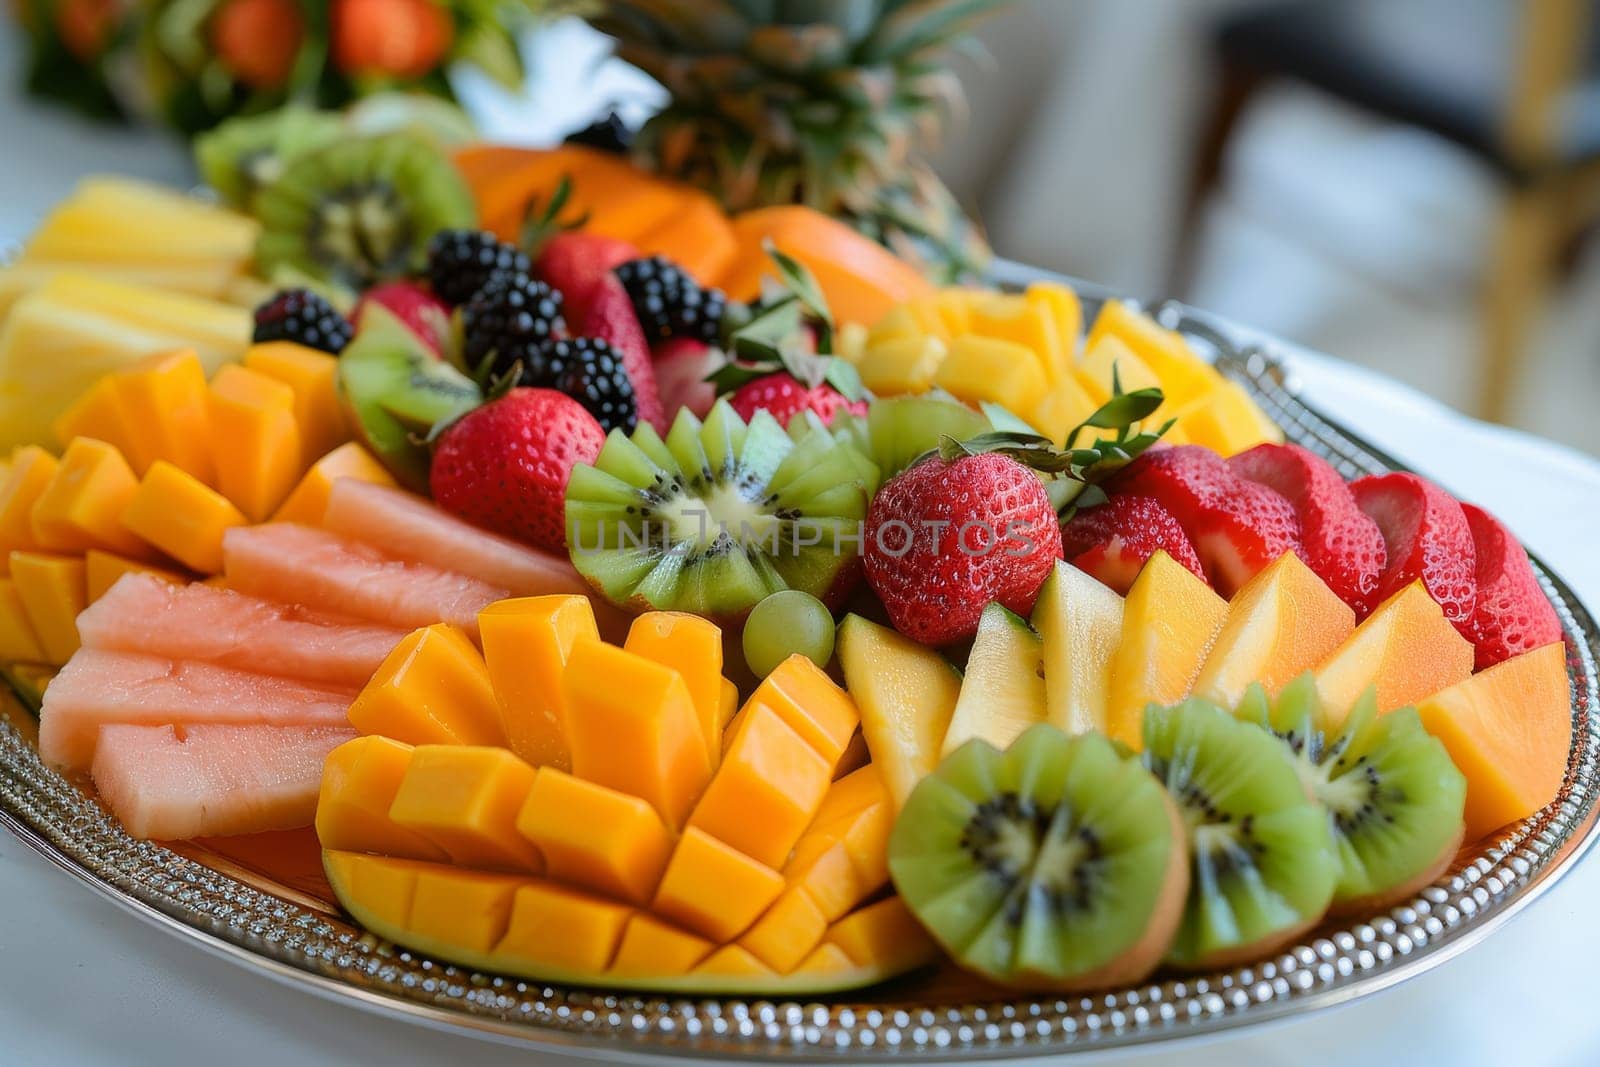 A plate of assorted fruits including watermelon, kiwi, strawberries, and pineapple. The plate is white and placed on a grey surface